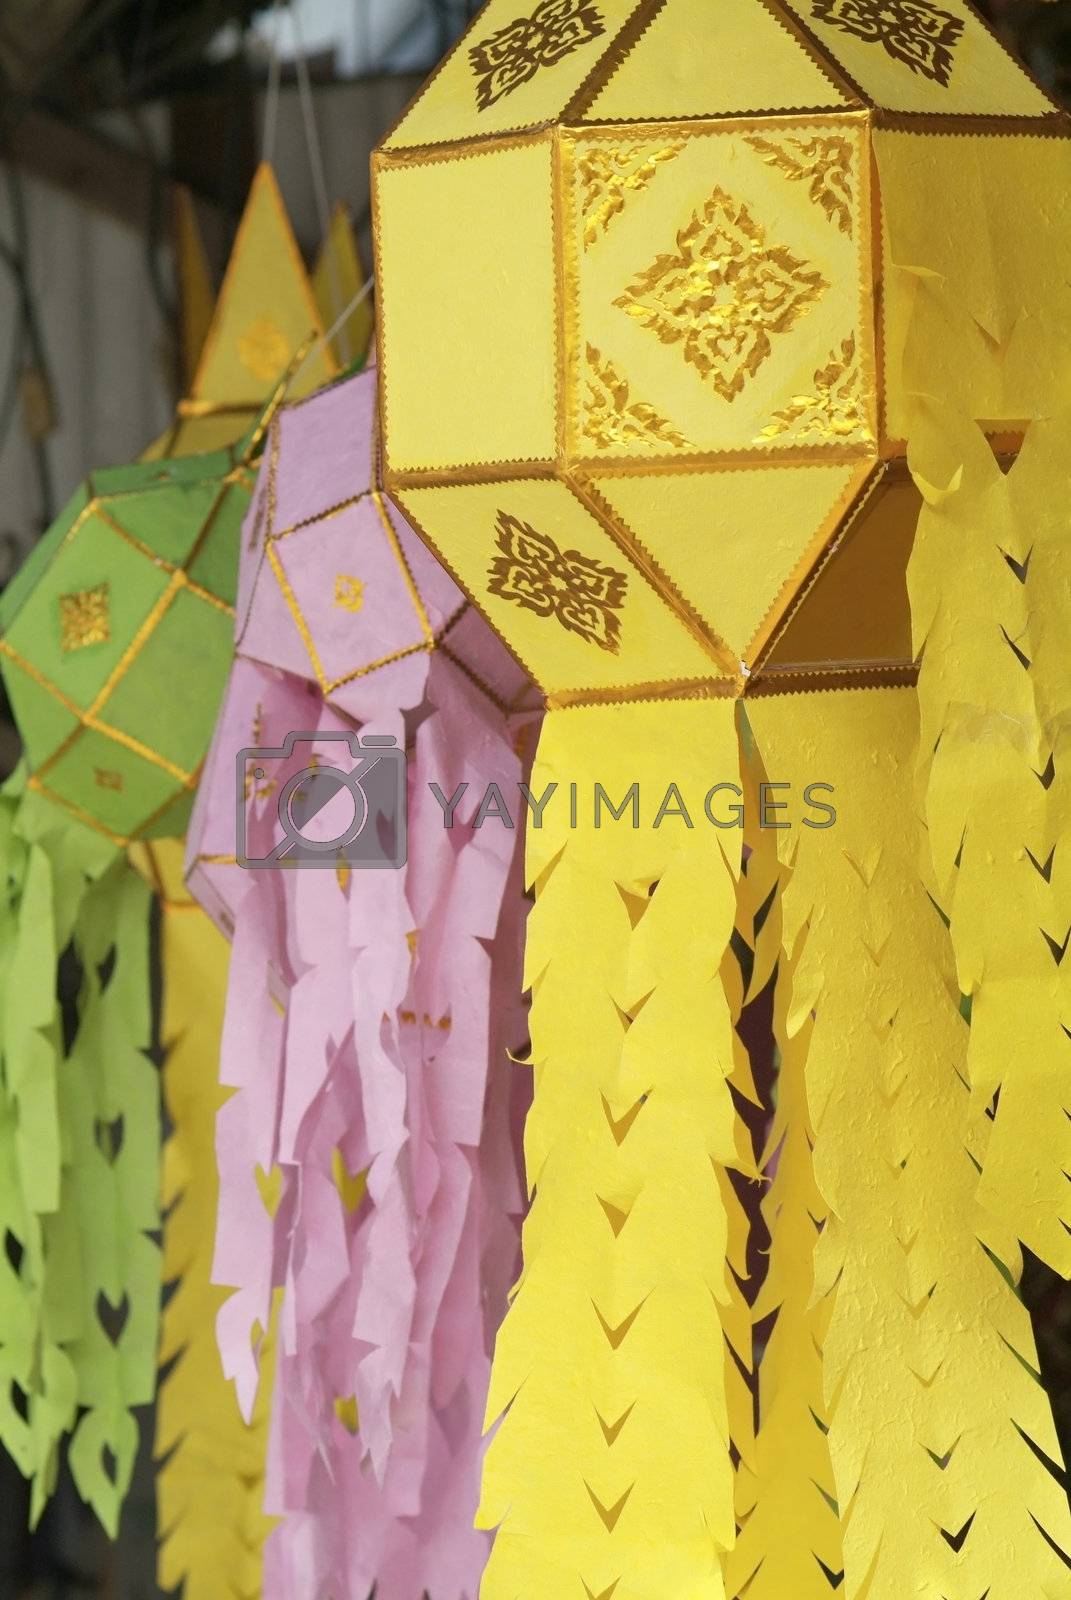 Royalty free image of Paper lanterns by epixx